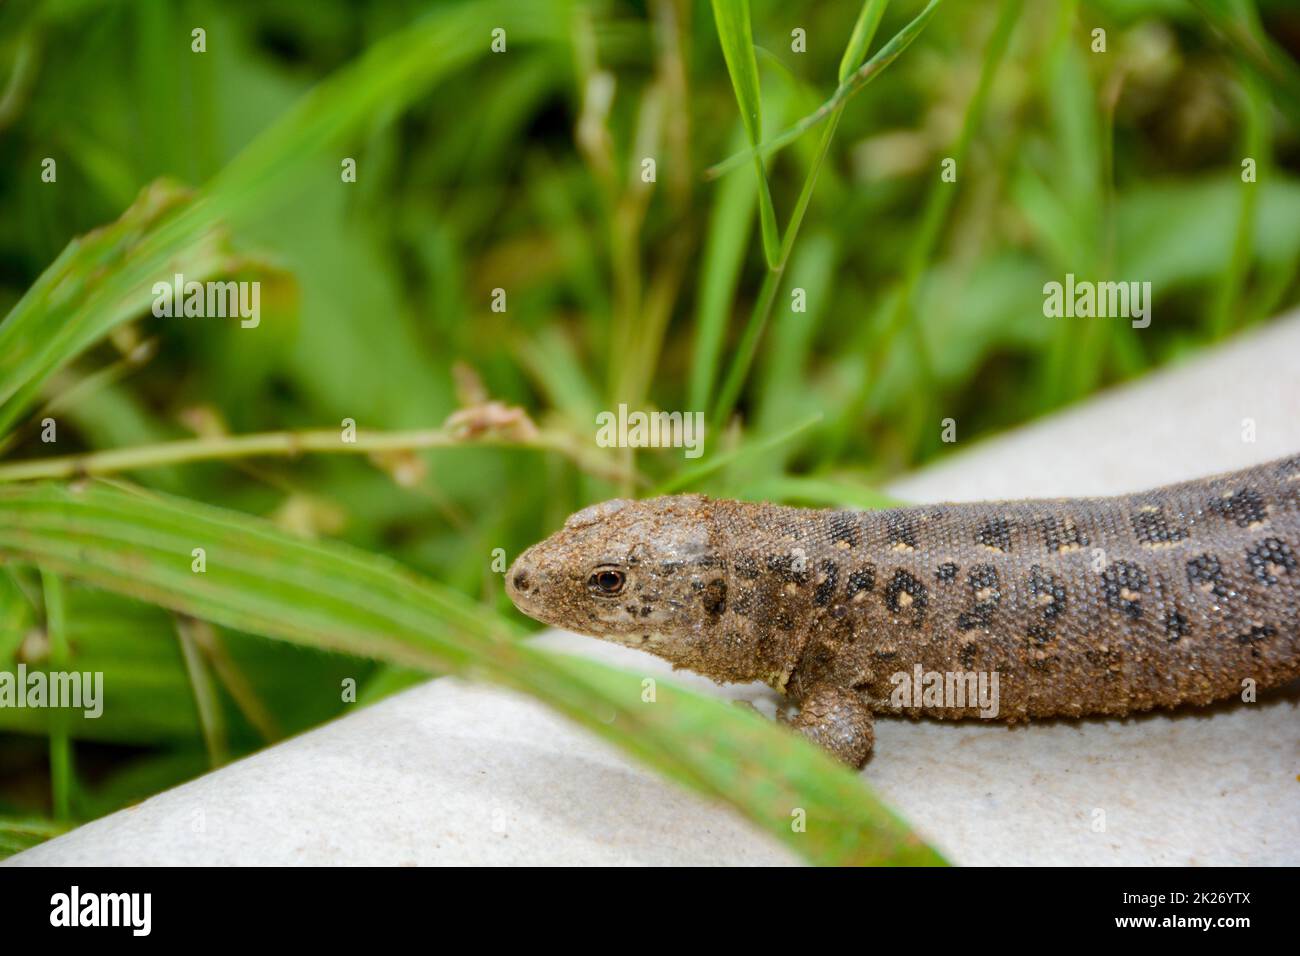 A brown lizard on the garden patio in front of grass Stock Photo